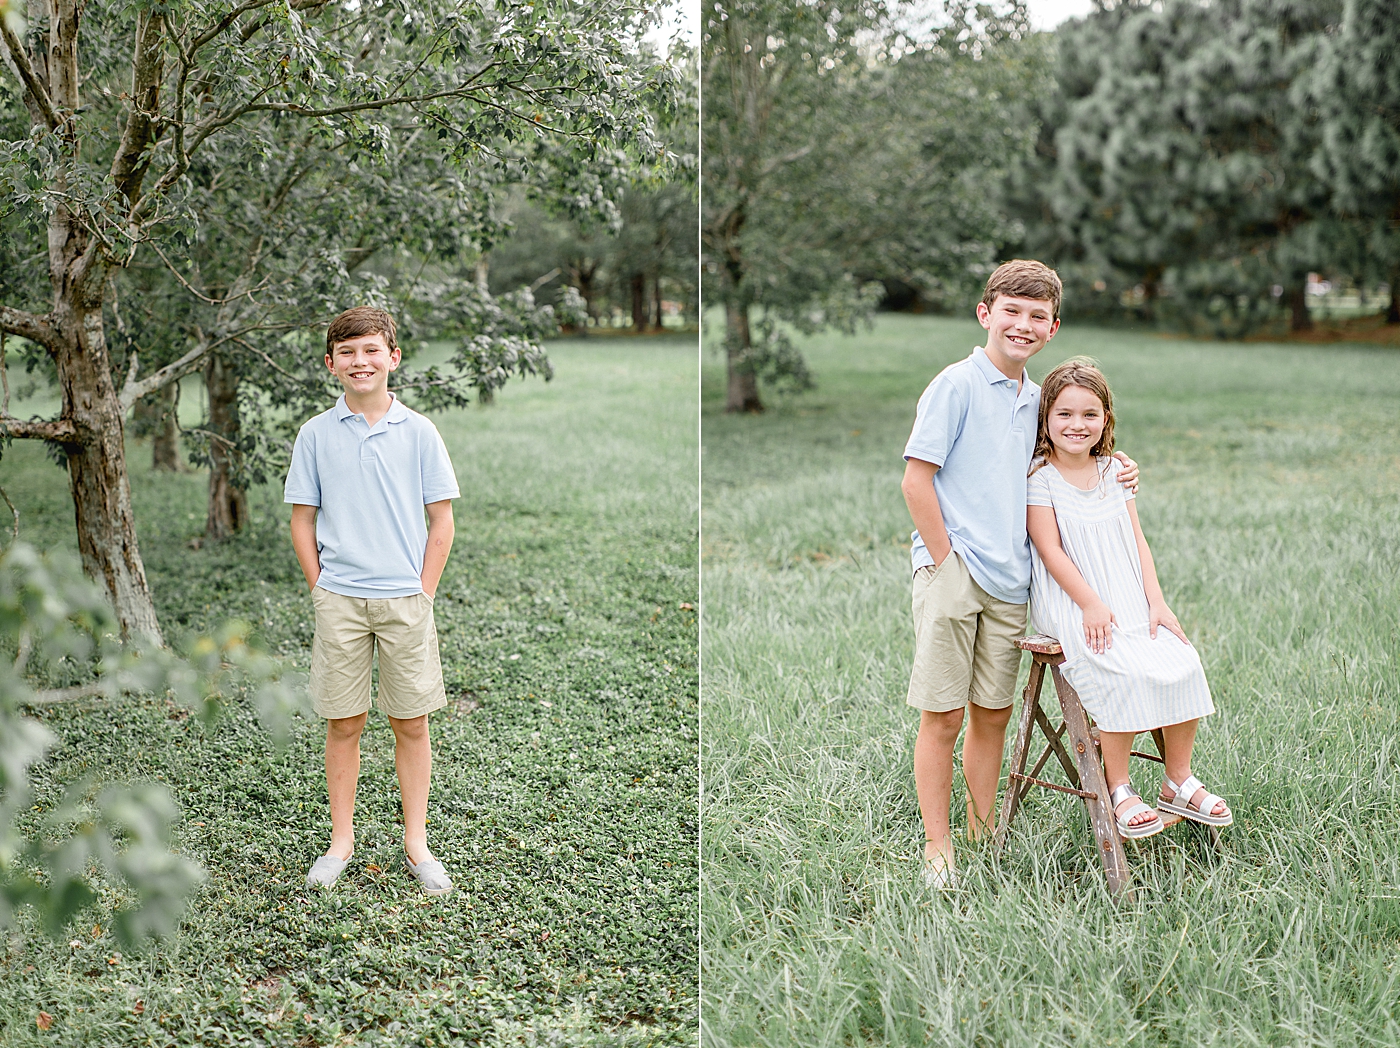 Sibling photos during family photoshoot. Photo by Brittany Elise Photography.